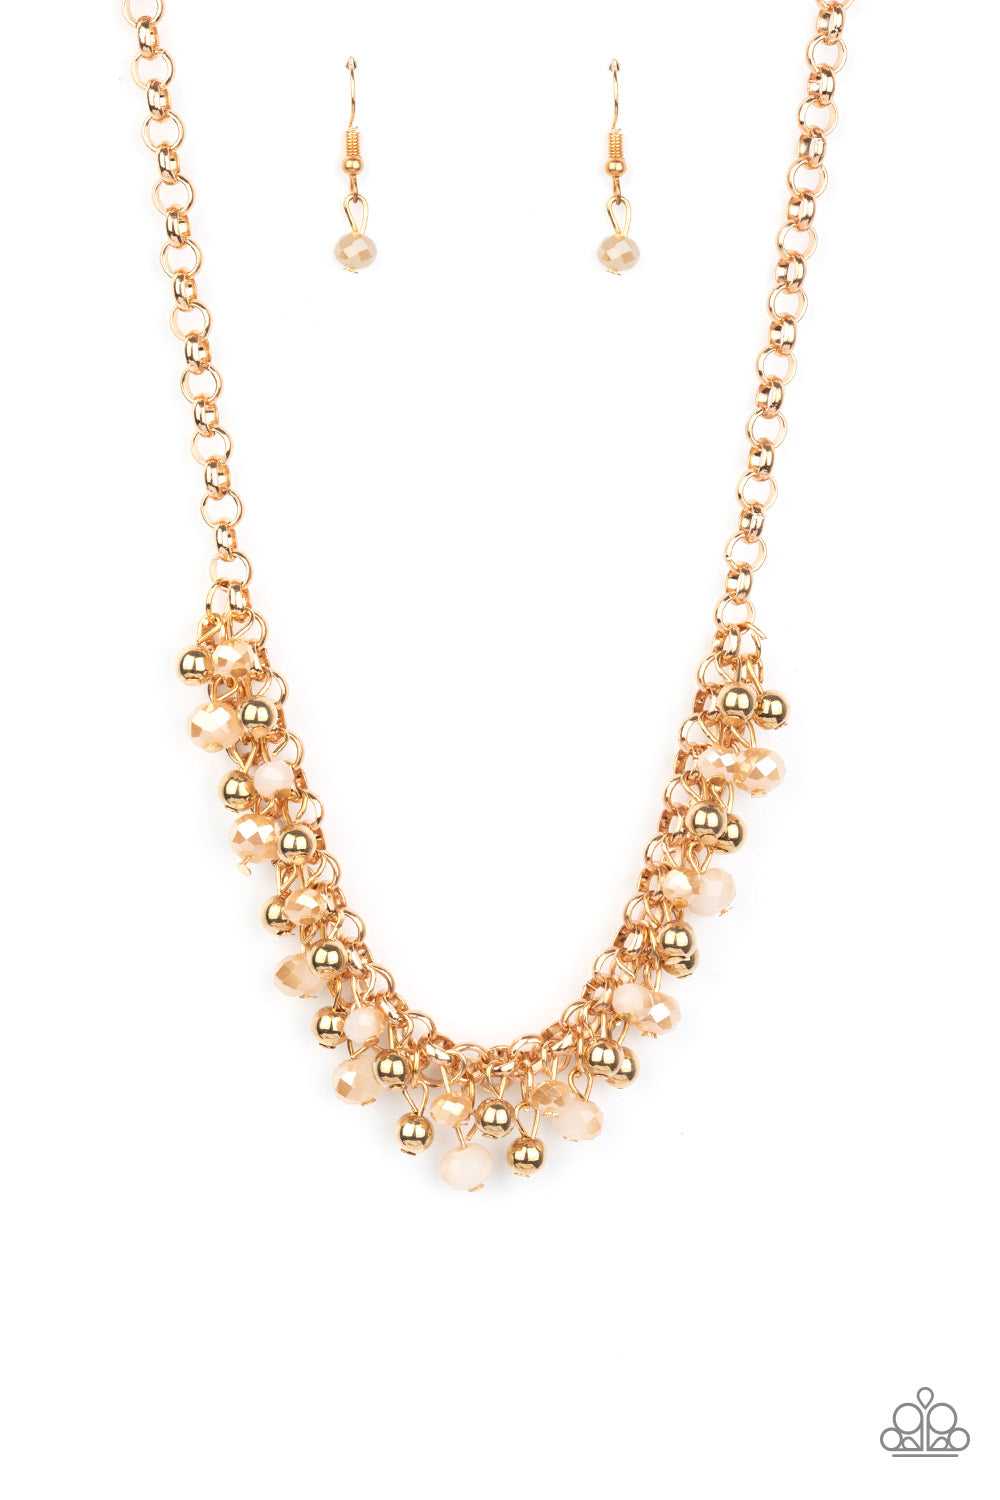 Trust Fund Baby Necklace & Just For The FUND Of It! Bracelet - Gold Combo Set - Princess Glam Shop